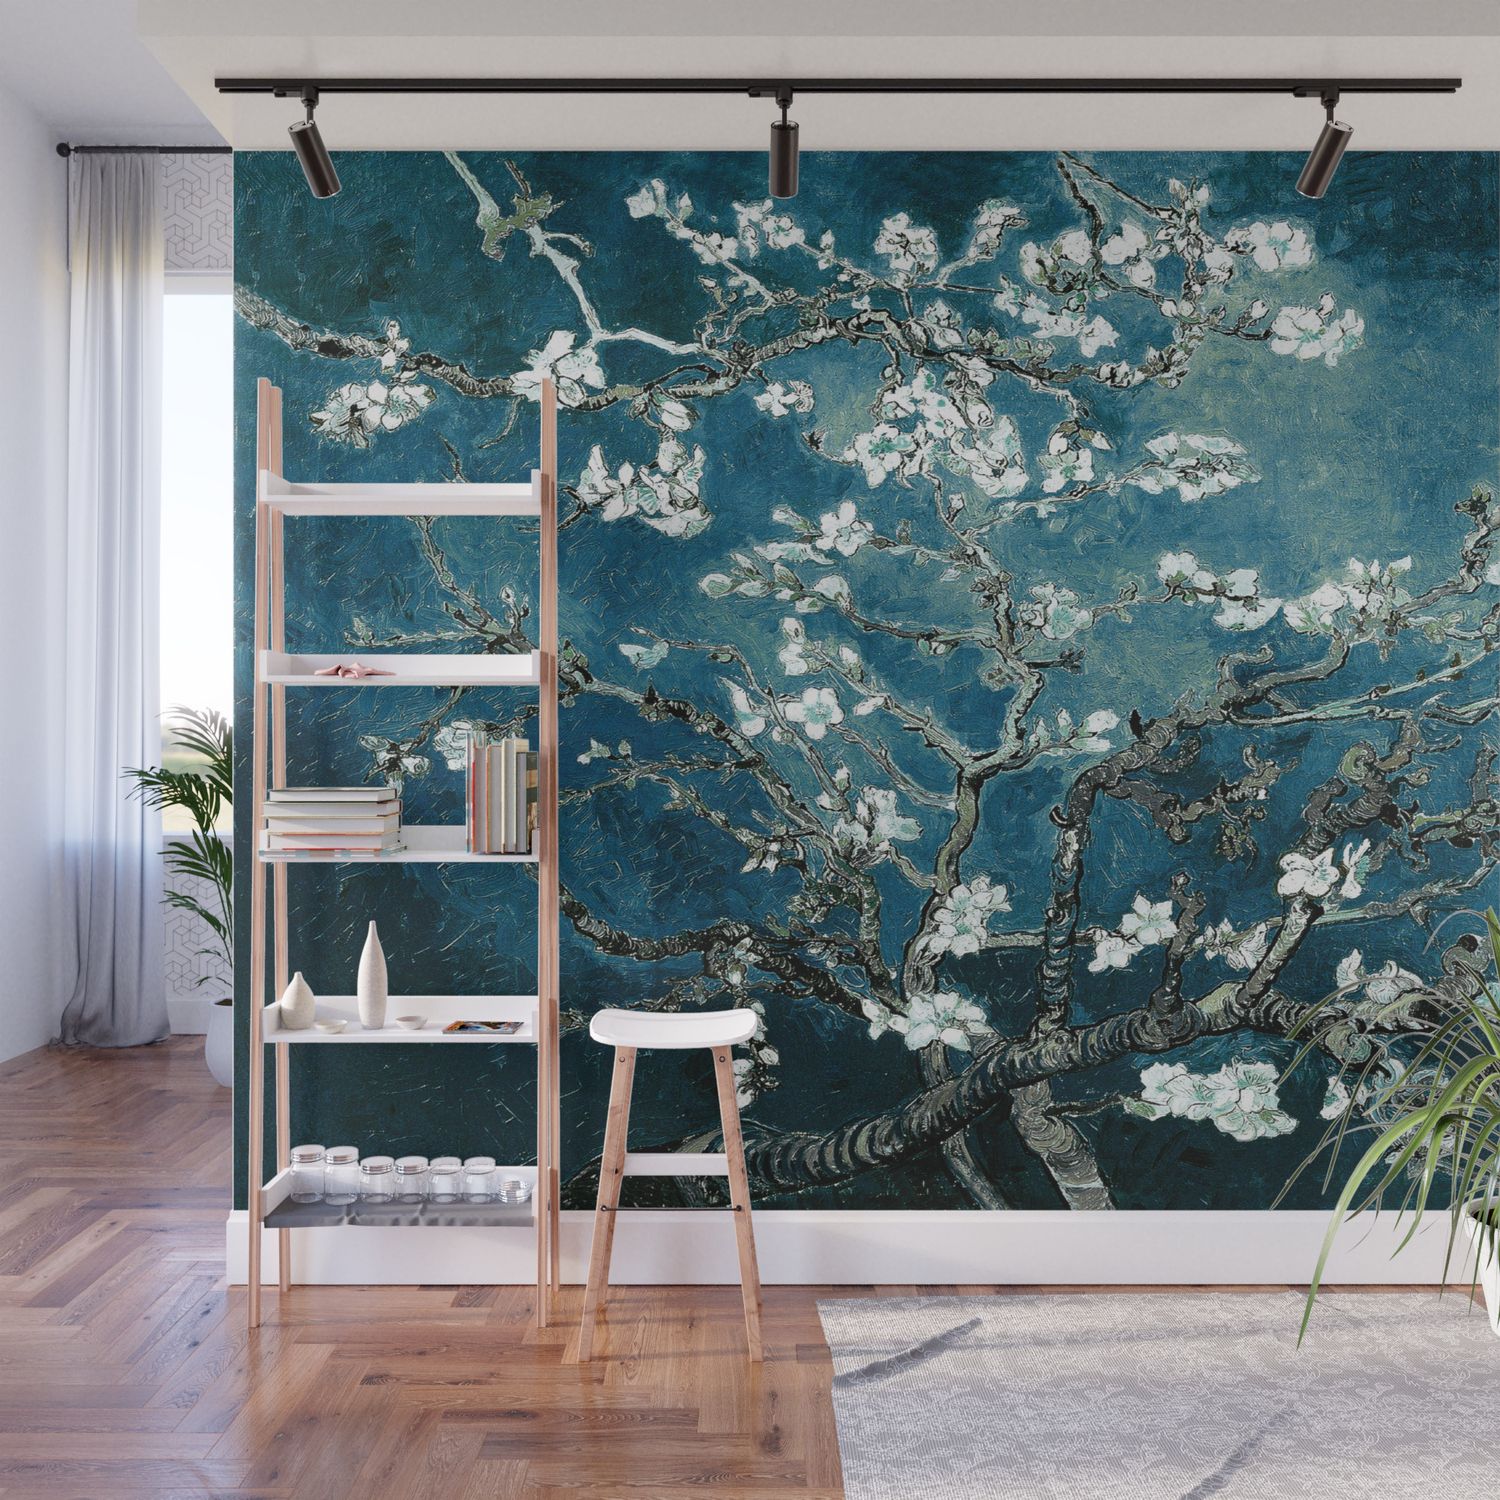 Most Up To Date Almond Blossoms Wall Art In Van Gogh Almond Blossoms : Dark Teal Wall Muralpurevintagelove (View 15 of 15)